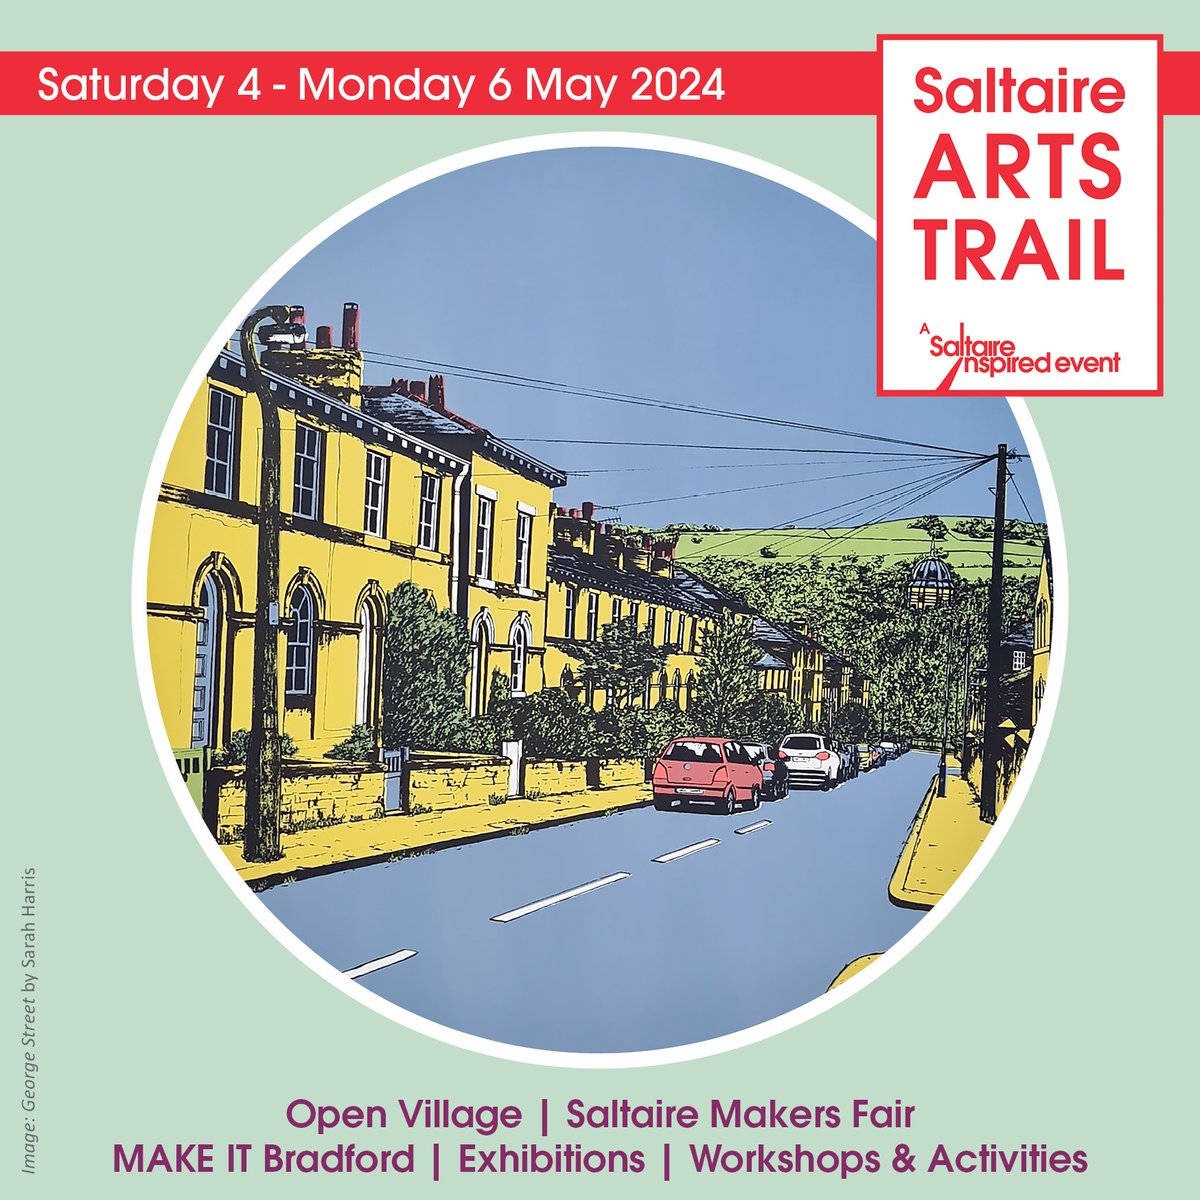 One week to go! Saltaire Arts Trail will showcase work by over 150 artists & makers over the bank holiday weekend in the Open Village, Makers Fair, MAKE IT Bradford, exhibitions and activities. 4-6 May. Full details at saltaireinspired.org.uk/events/saltair… #saltaireartstrail #visitbradford